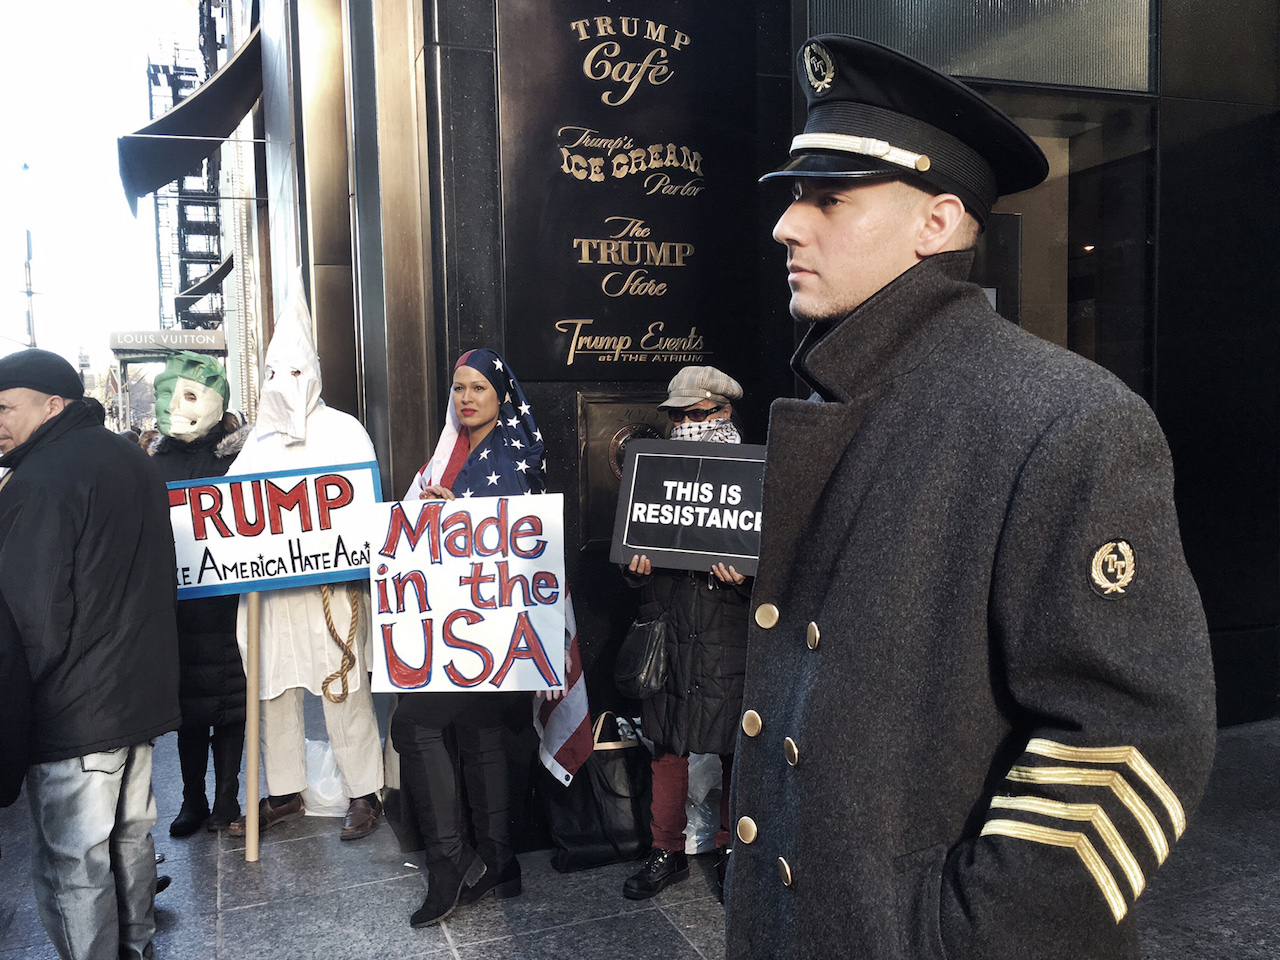 Anti-Donald Trump protest is held at Trump Tower in 5th Avenue in New York, as Republican presidential front-runner Donald Trump has been calling for barring all Muslims from entering the United State. Dec 20, 2015, New York.